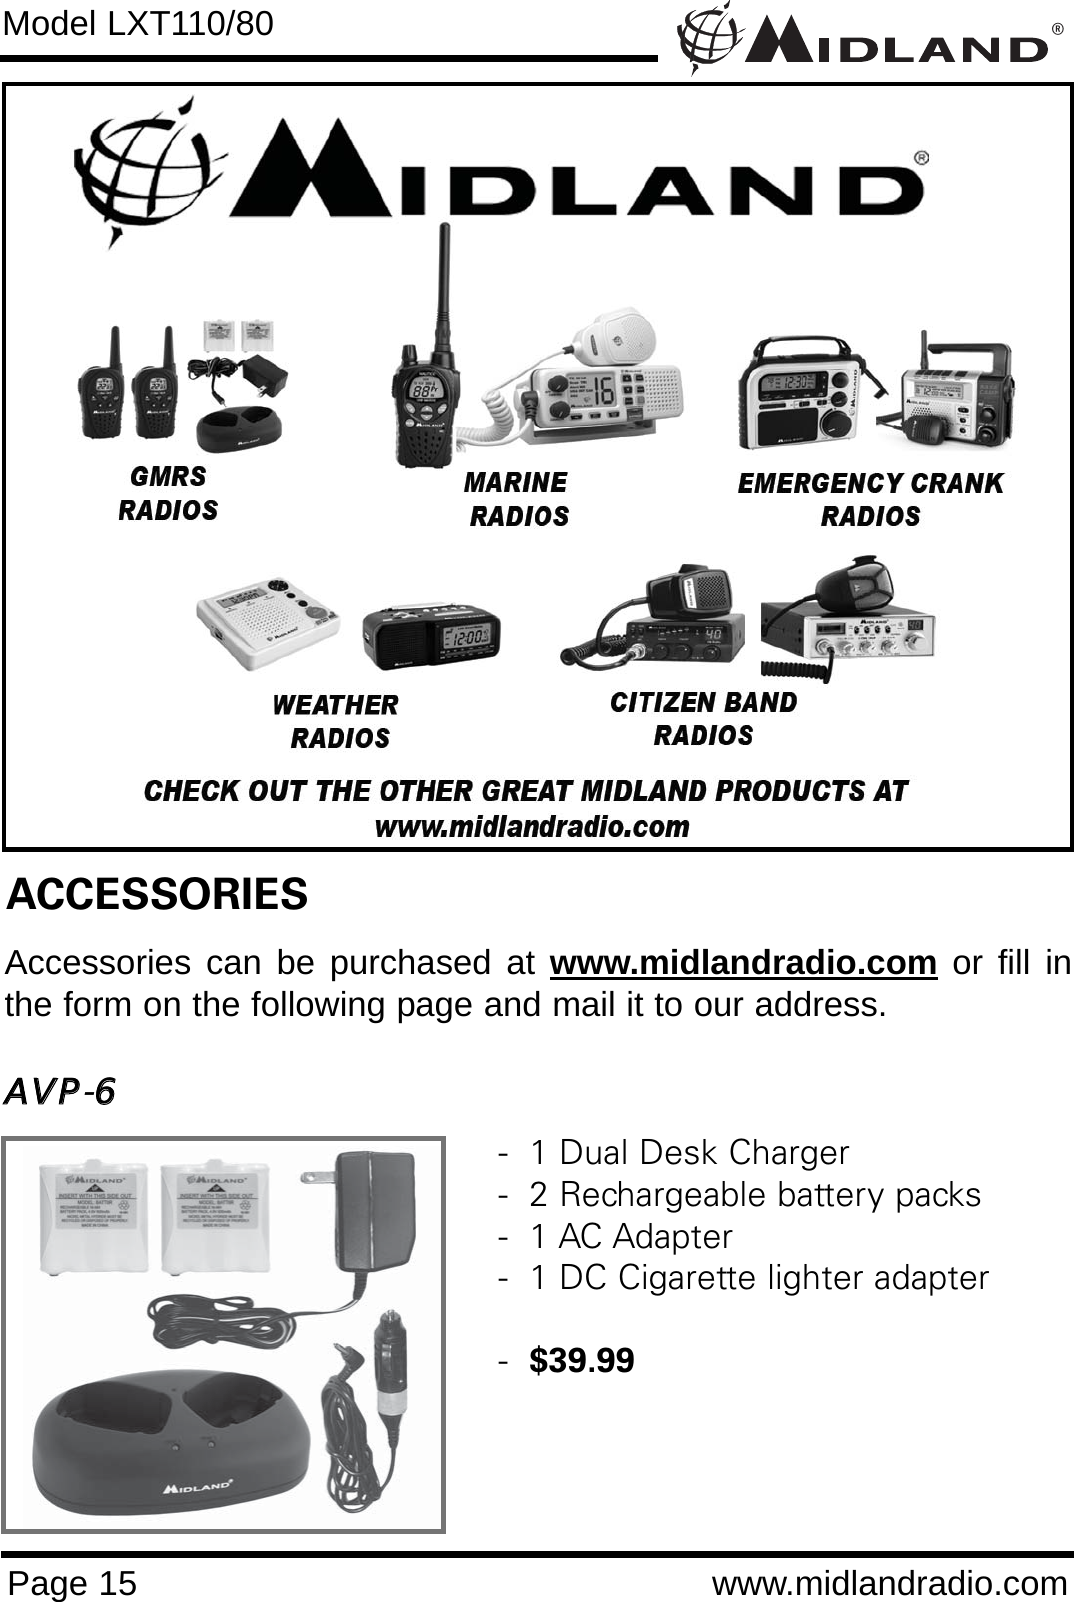 ®Page 15 www.midlandradio.comModel LXT110/80ACCESSORIESAccessories can be purchased at www.midlandradio.com or fill inthe form on the following page and mail it to our address.AAVVPP-66-  1 Dual Desk Charger-  2 Rechargeable battery packs-  1 AC Adapter-  1 DC Cigarette lighter adapter-  $39.99